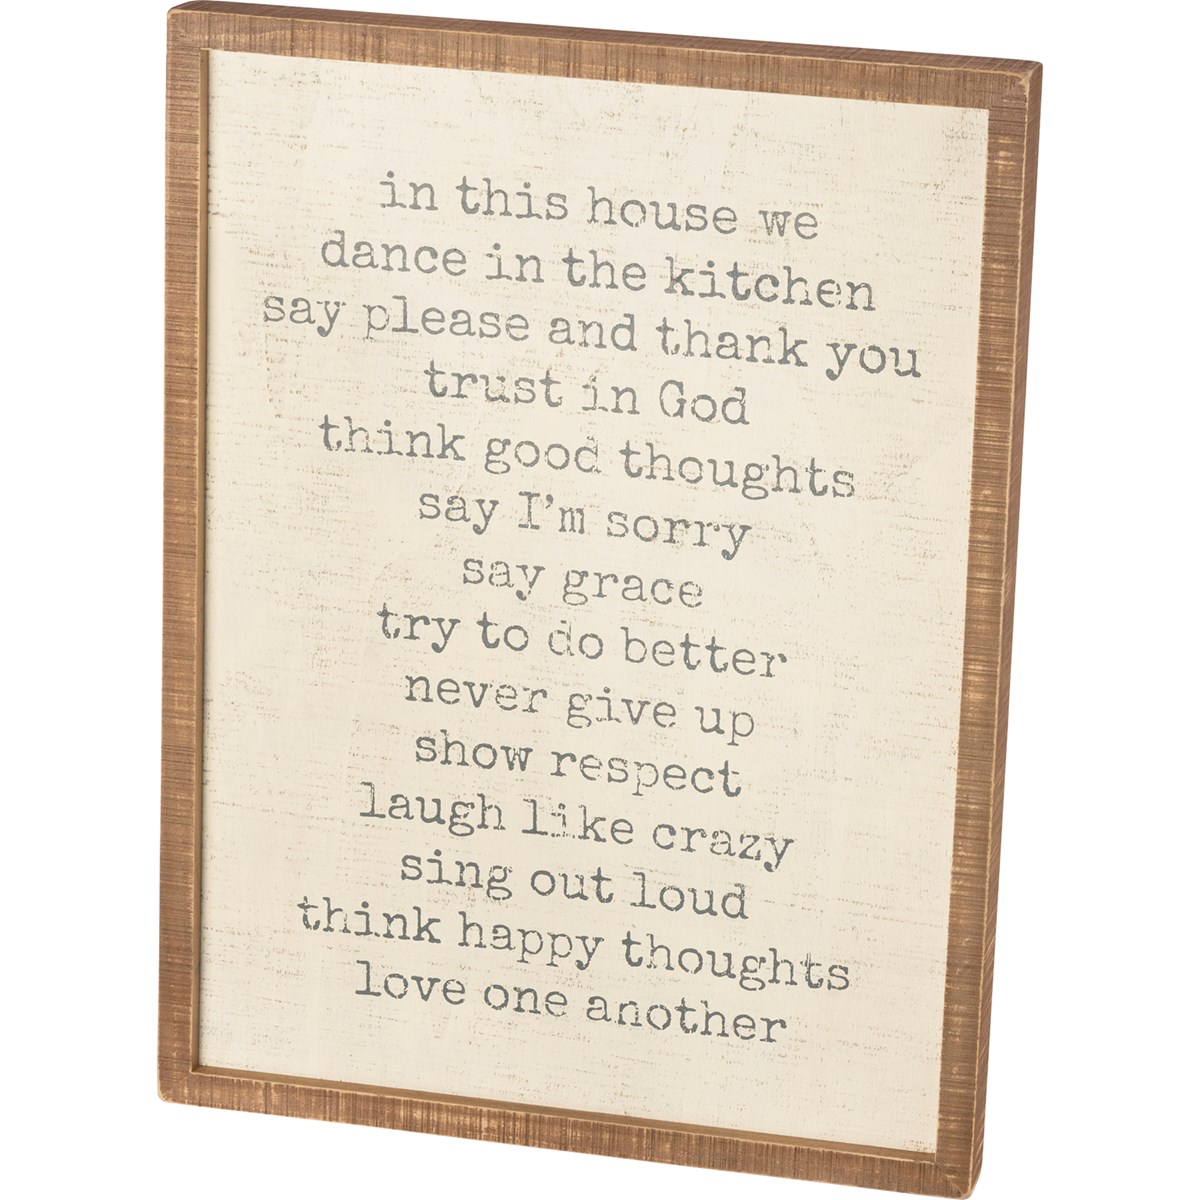 Inset Box Sign - In This House We Trust In God - 18" x 24" x 1.75" - Wood